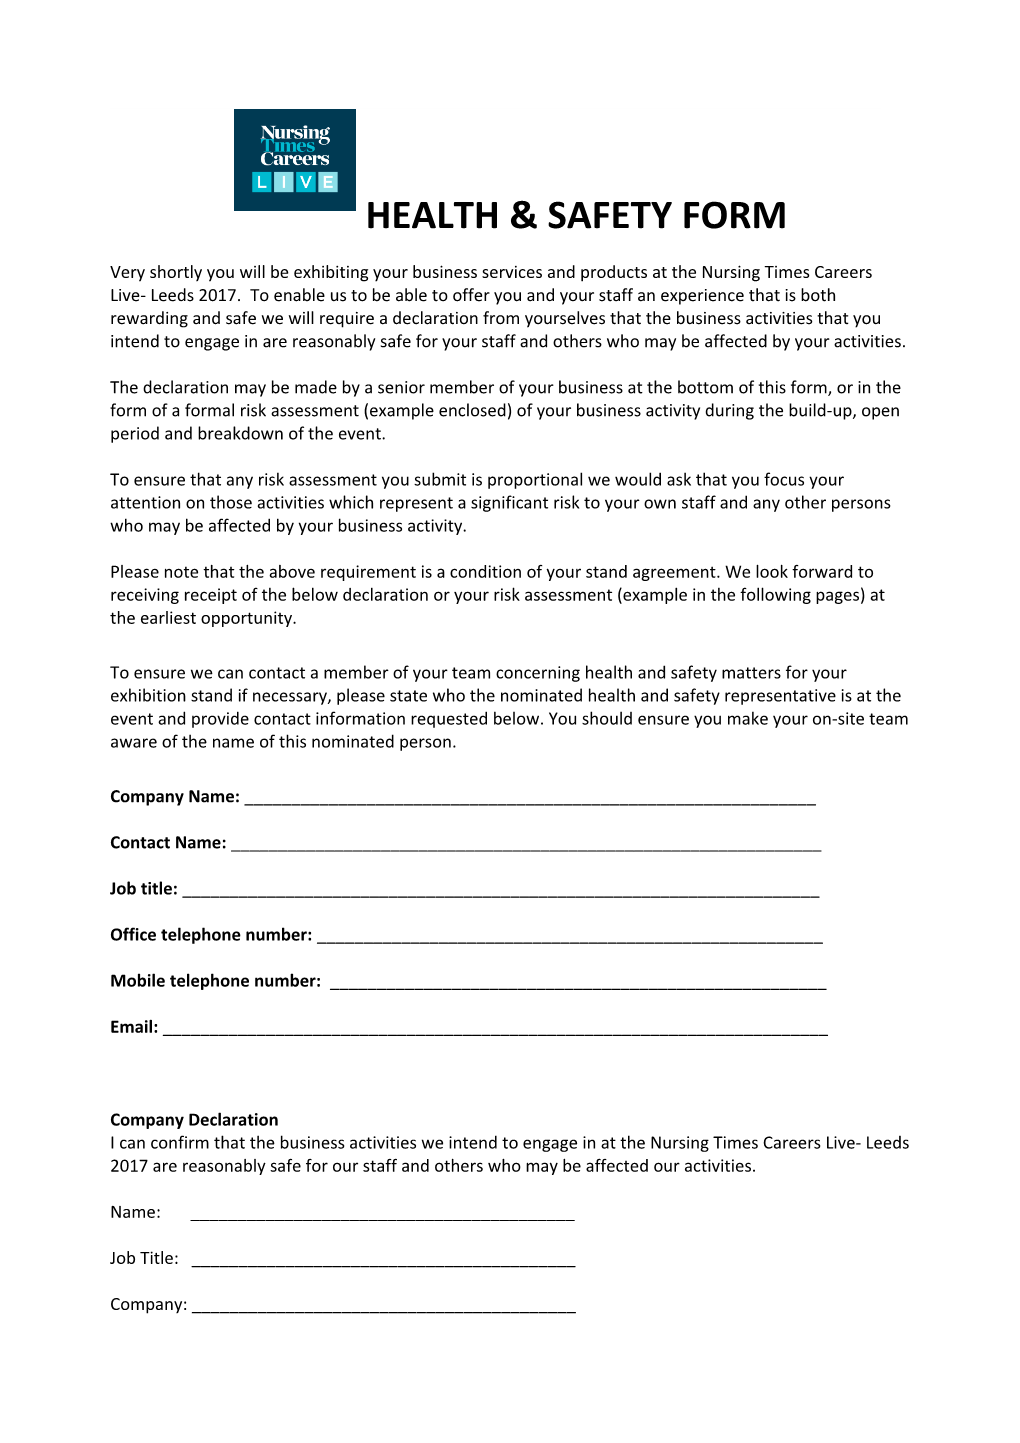 Health & Safety Form